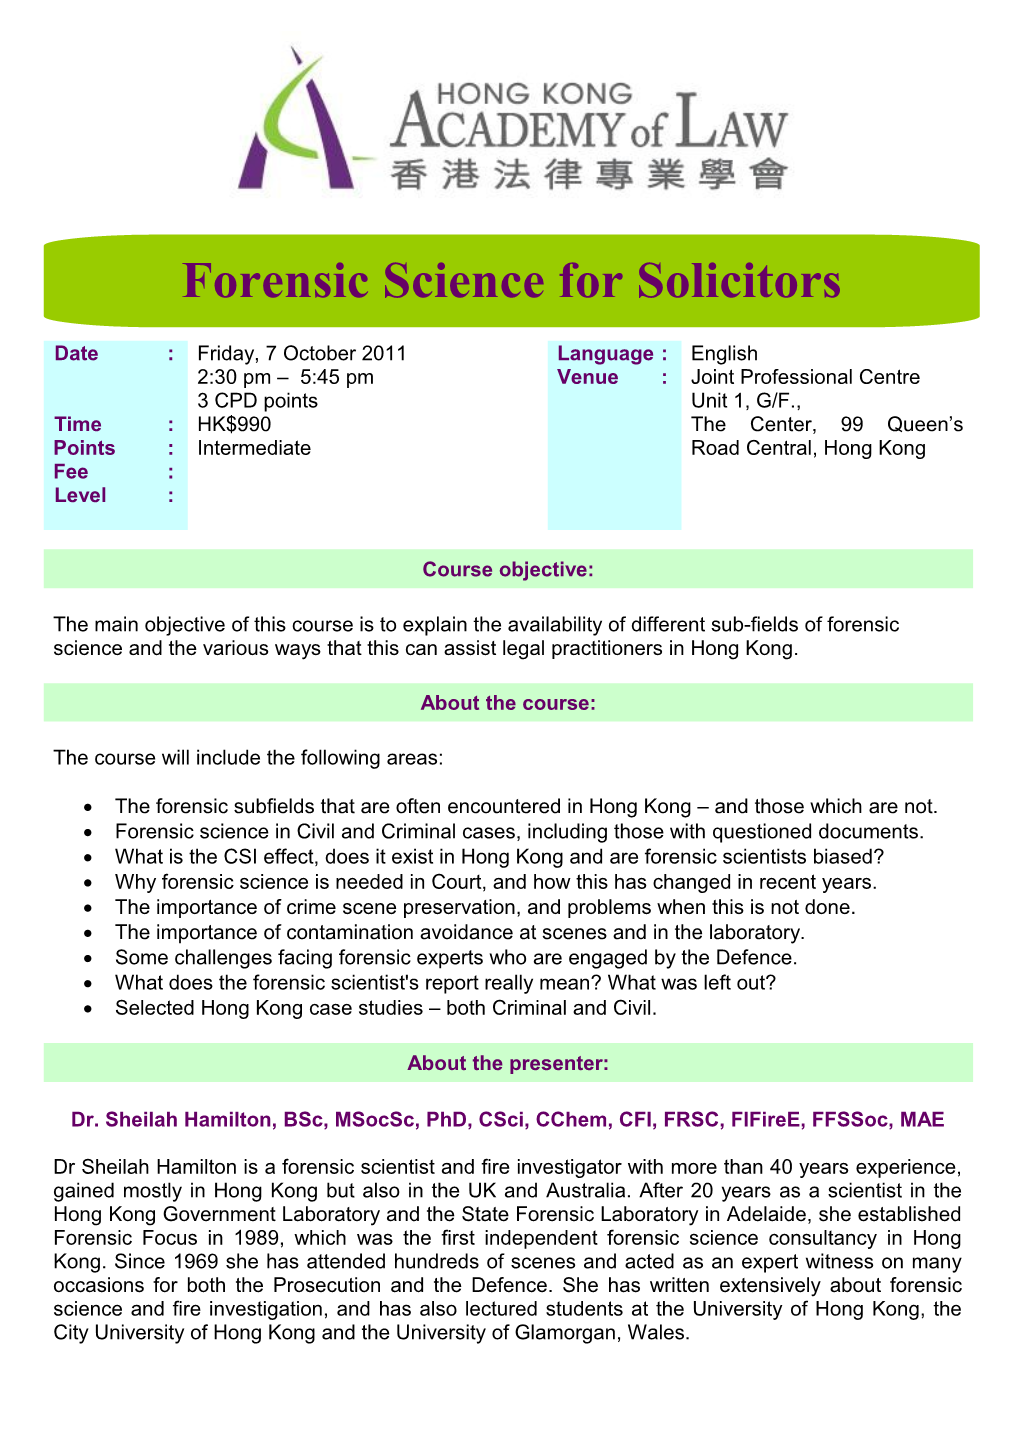 Forensic Science in Civil and Criminal Cases, Including Those with Questioned Documents